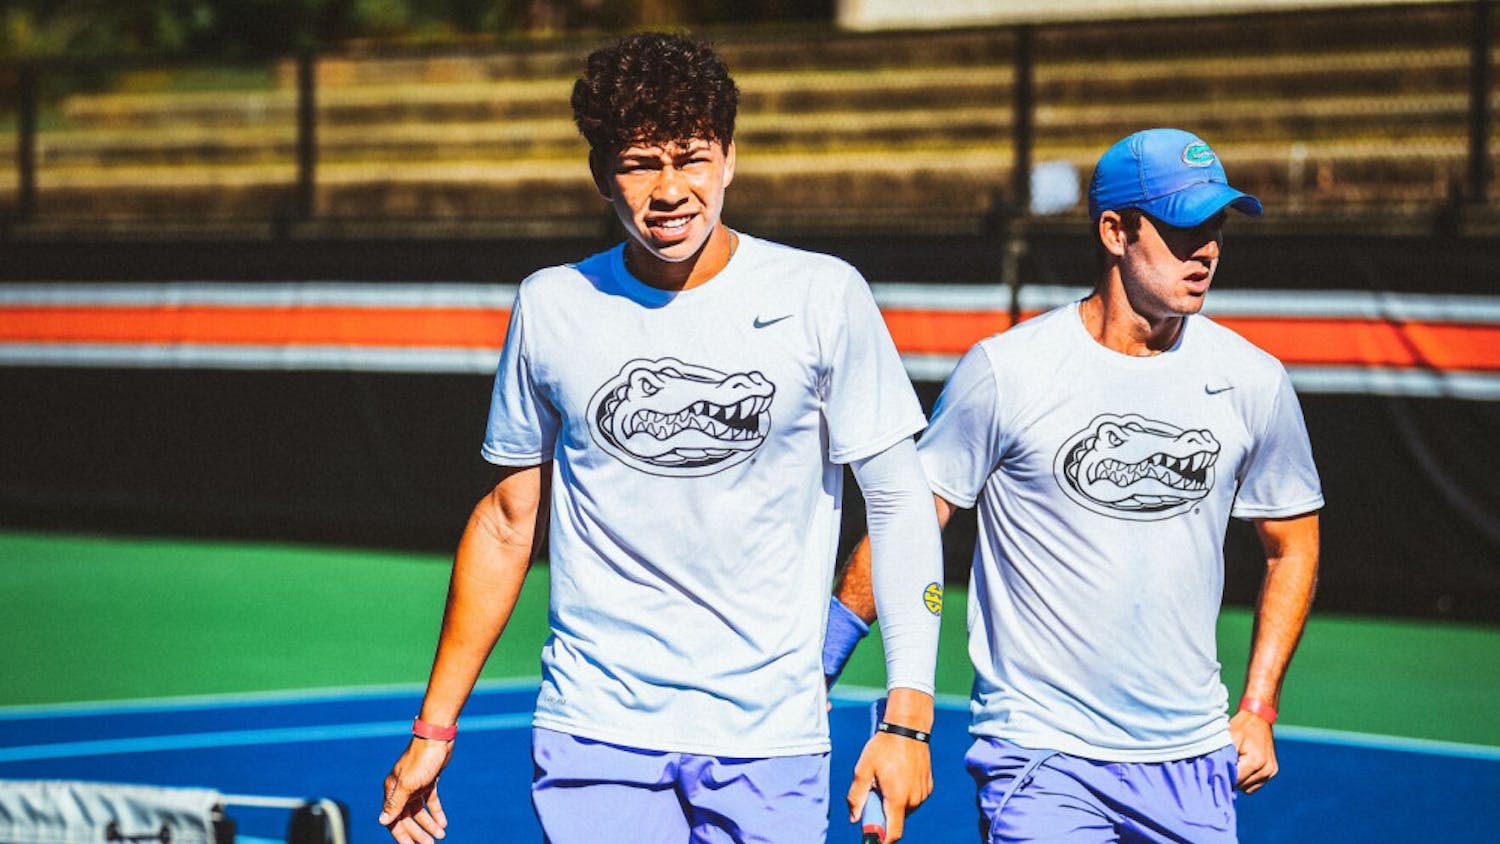 Freshman Ben Shelton walks alongside doubles teammate Will Grant after dropping a match, 8-7, against Auburn on Oct. 2 at the Tiger Fall Invitational in Auburn, Alabama.